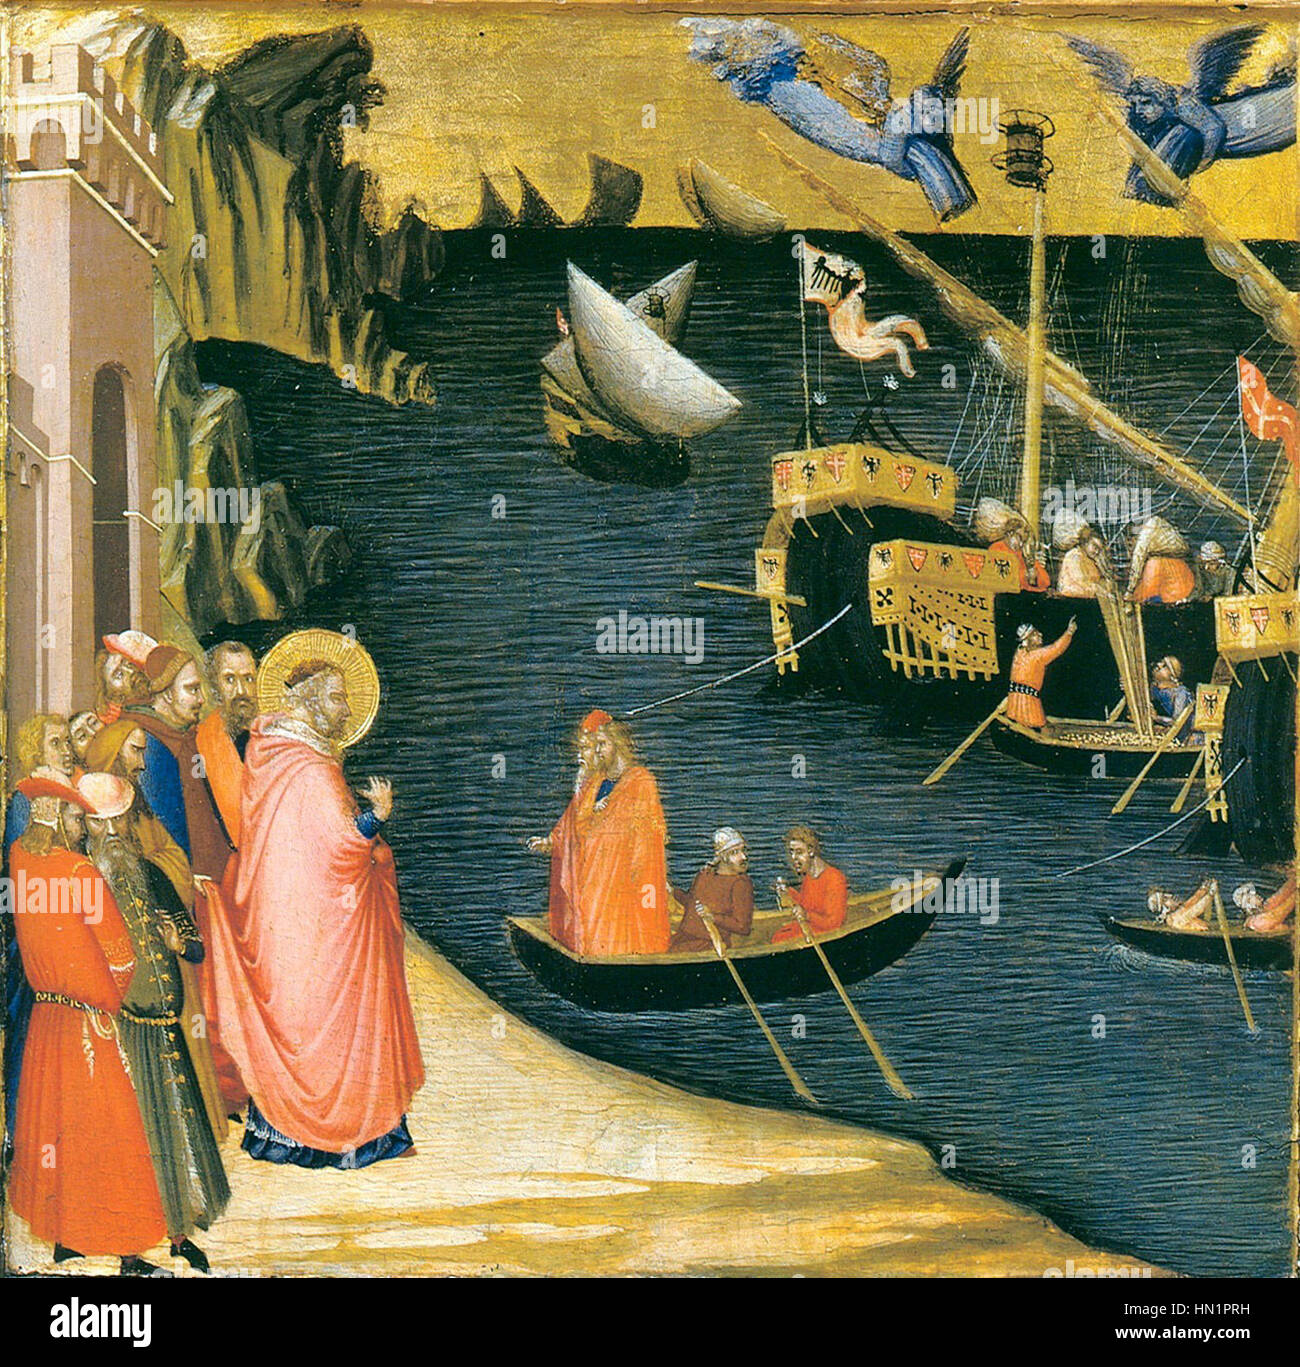 Lorenzetti Amrogio saint-nicolas-miraculously-filling-the-holds-of-the-ships-with-grain-1332 Stockfoto